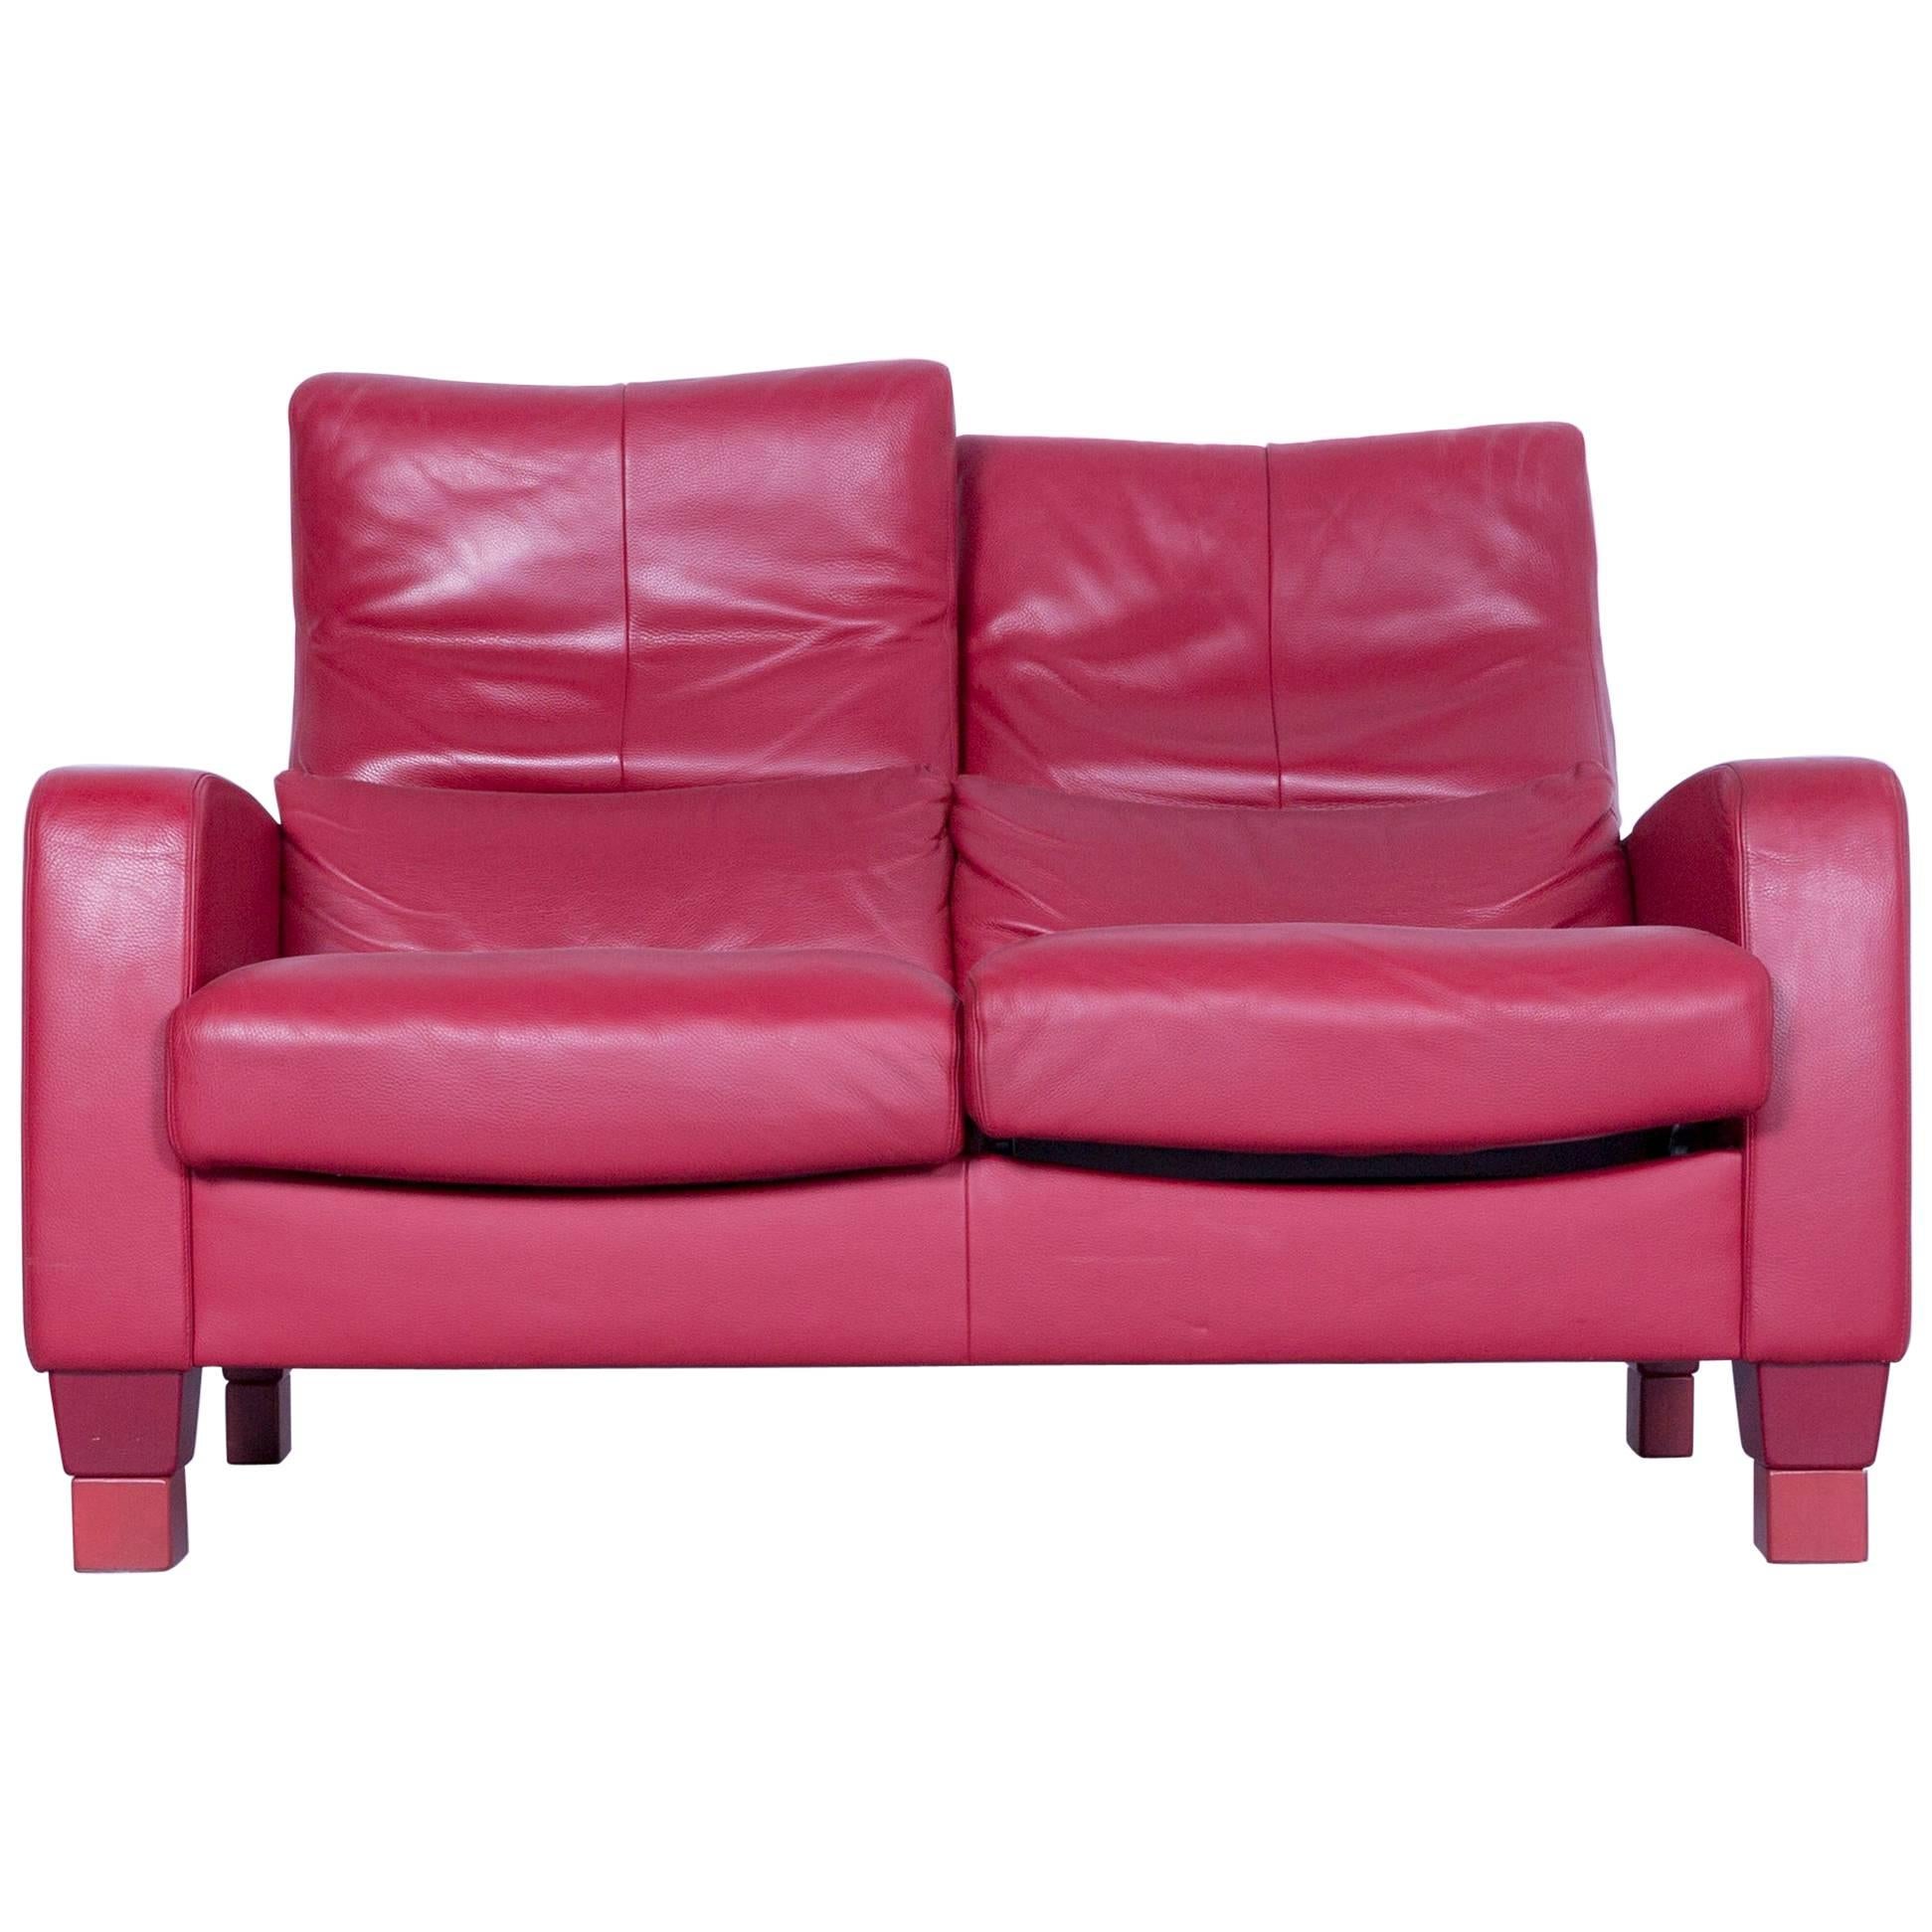 Erpo Designer Sofa Leather Red Two-Seater Couch Modern Recline Function